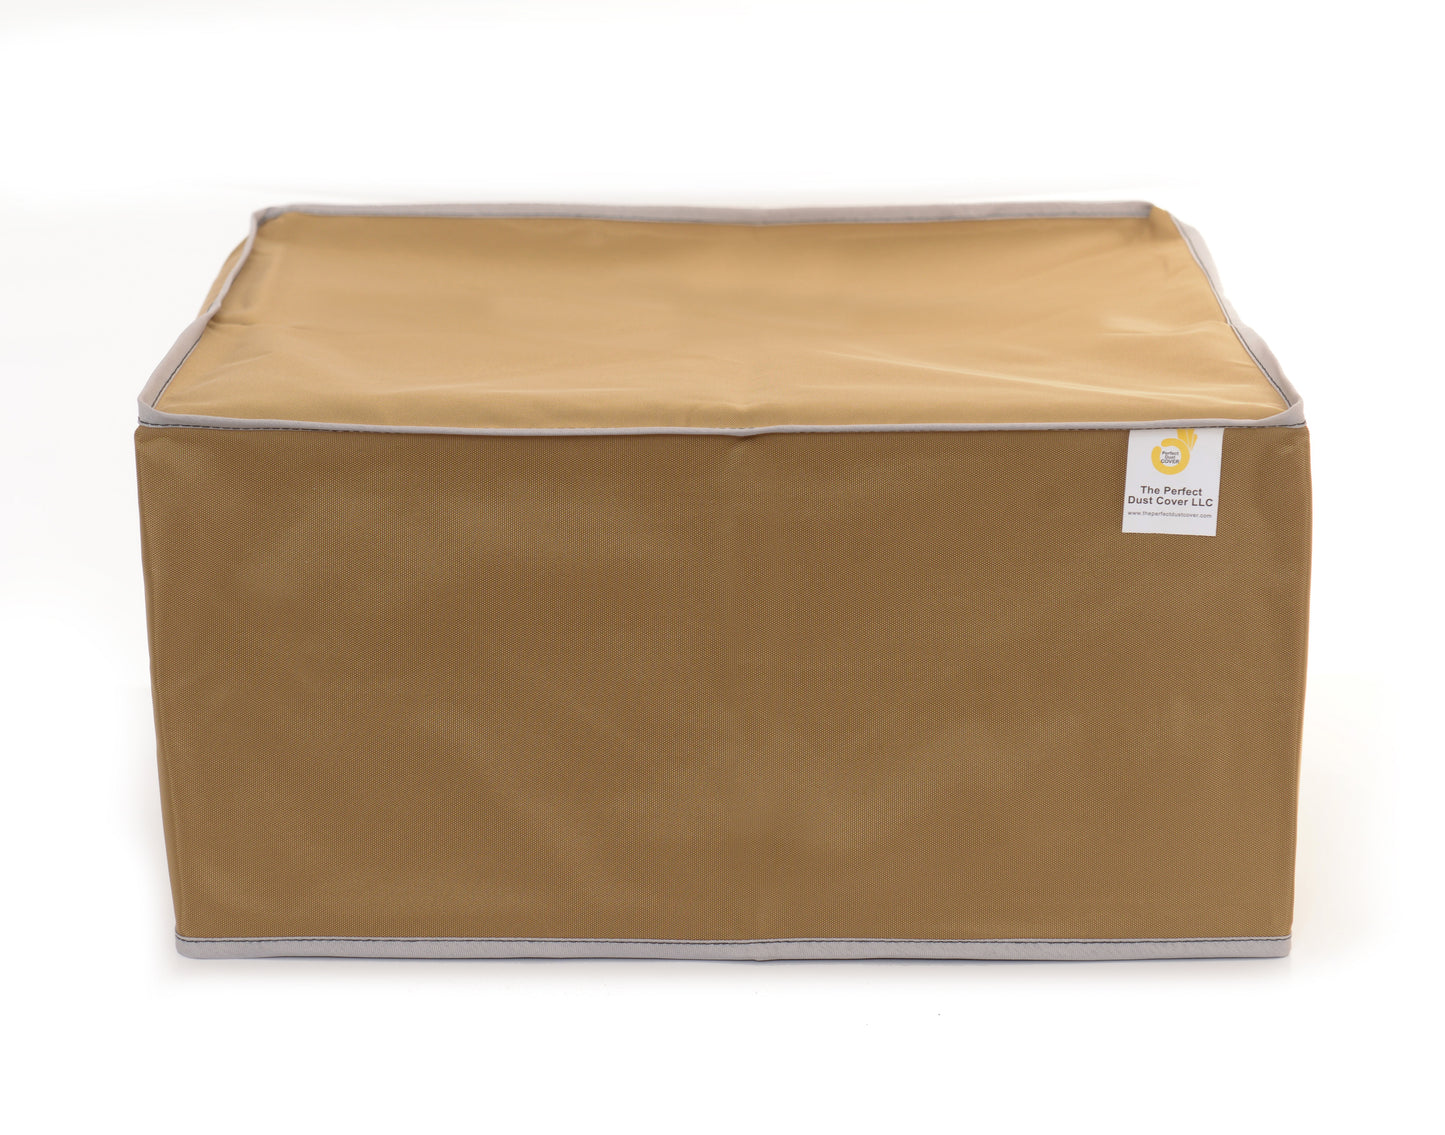 Perfect Dust Cover, Tan Nylon Cover Compatible with HP DesignJet Z6 64-in PostScript Printer, Anti Static, Double Stitched and Waterproof Dust Cover Dimensions 102.7''W x 31.2''D x 55.2''H by Perfect Dust Cover LLC